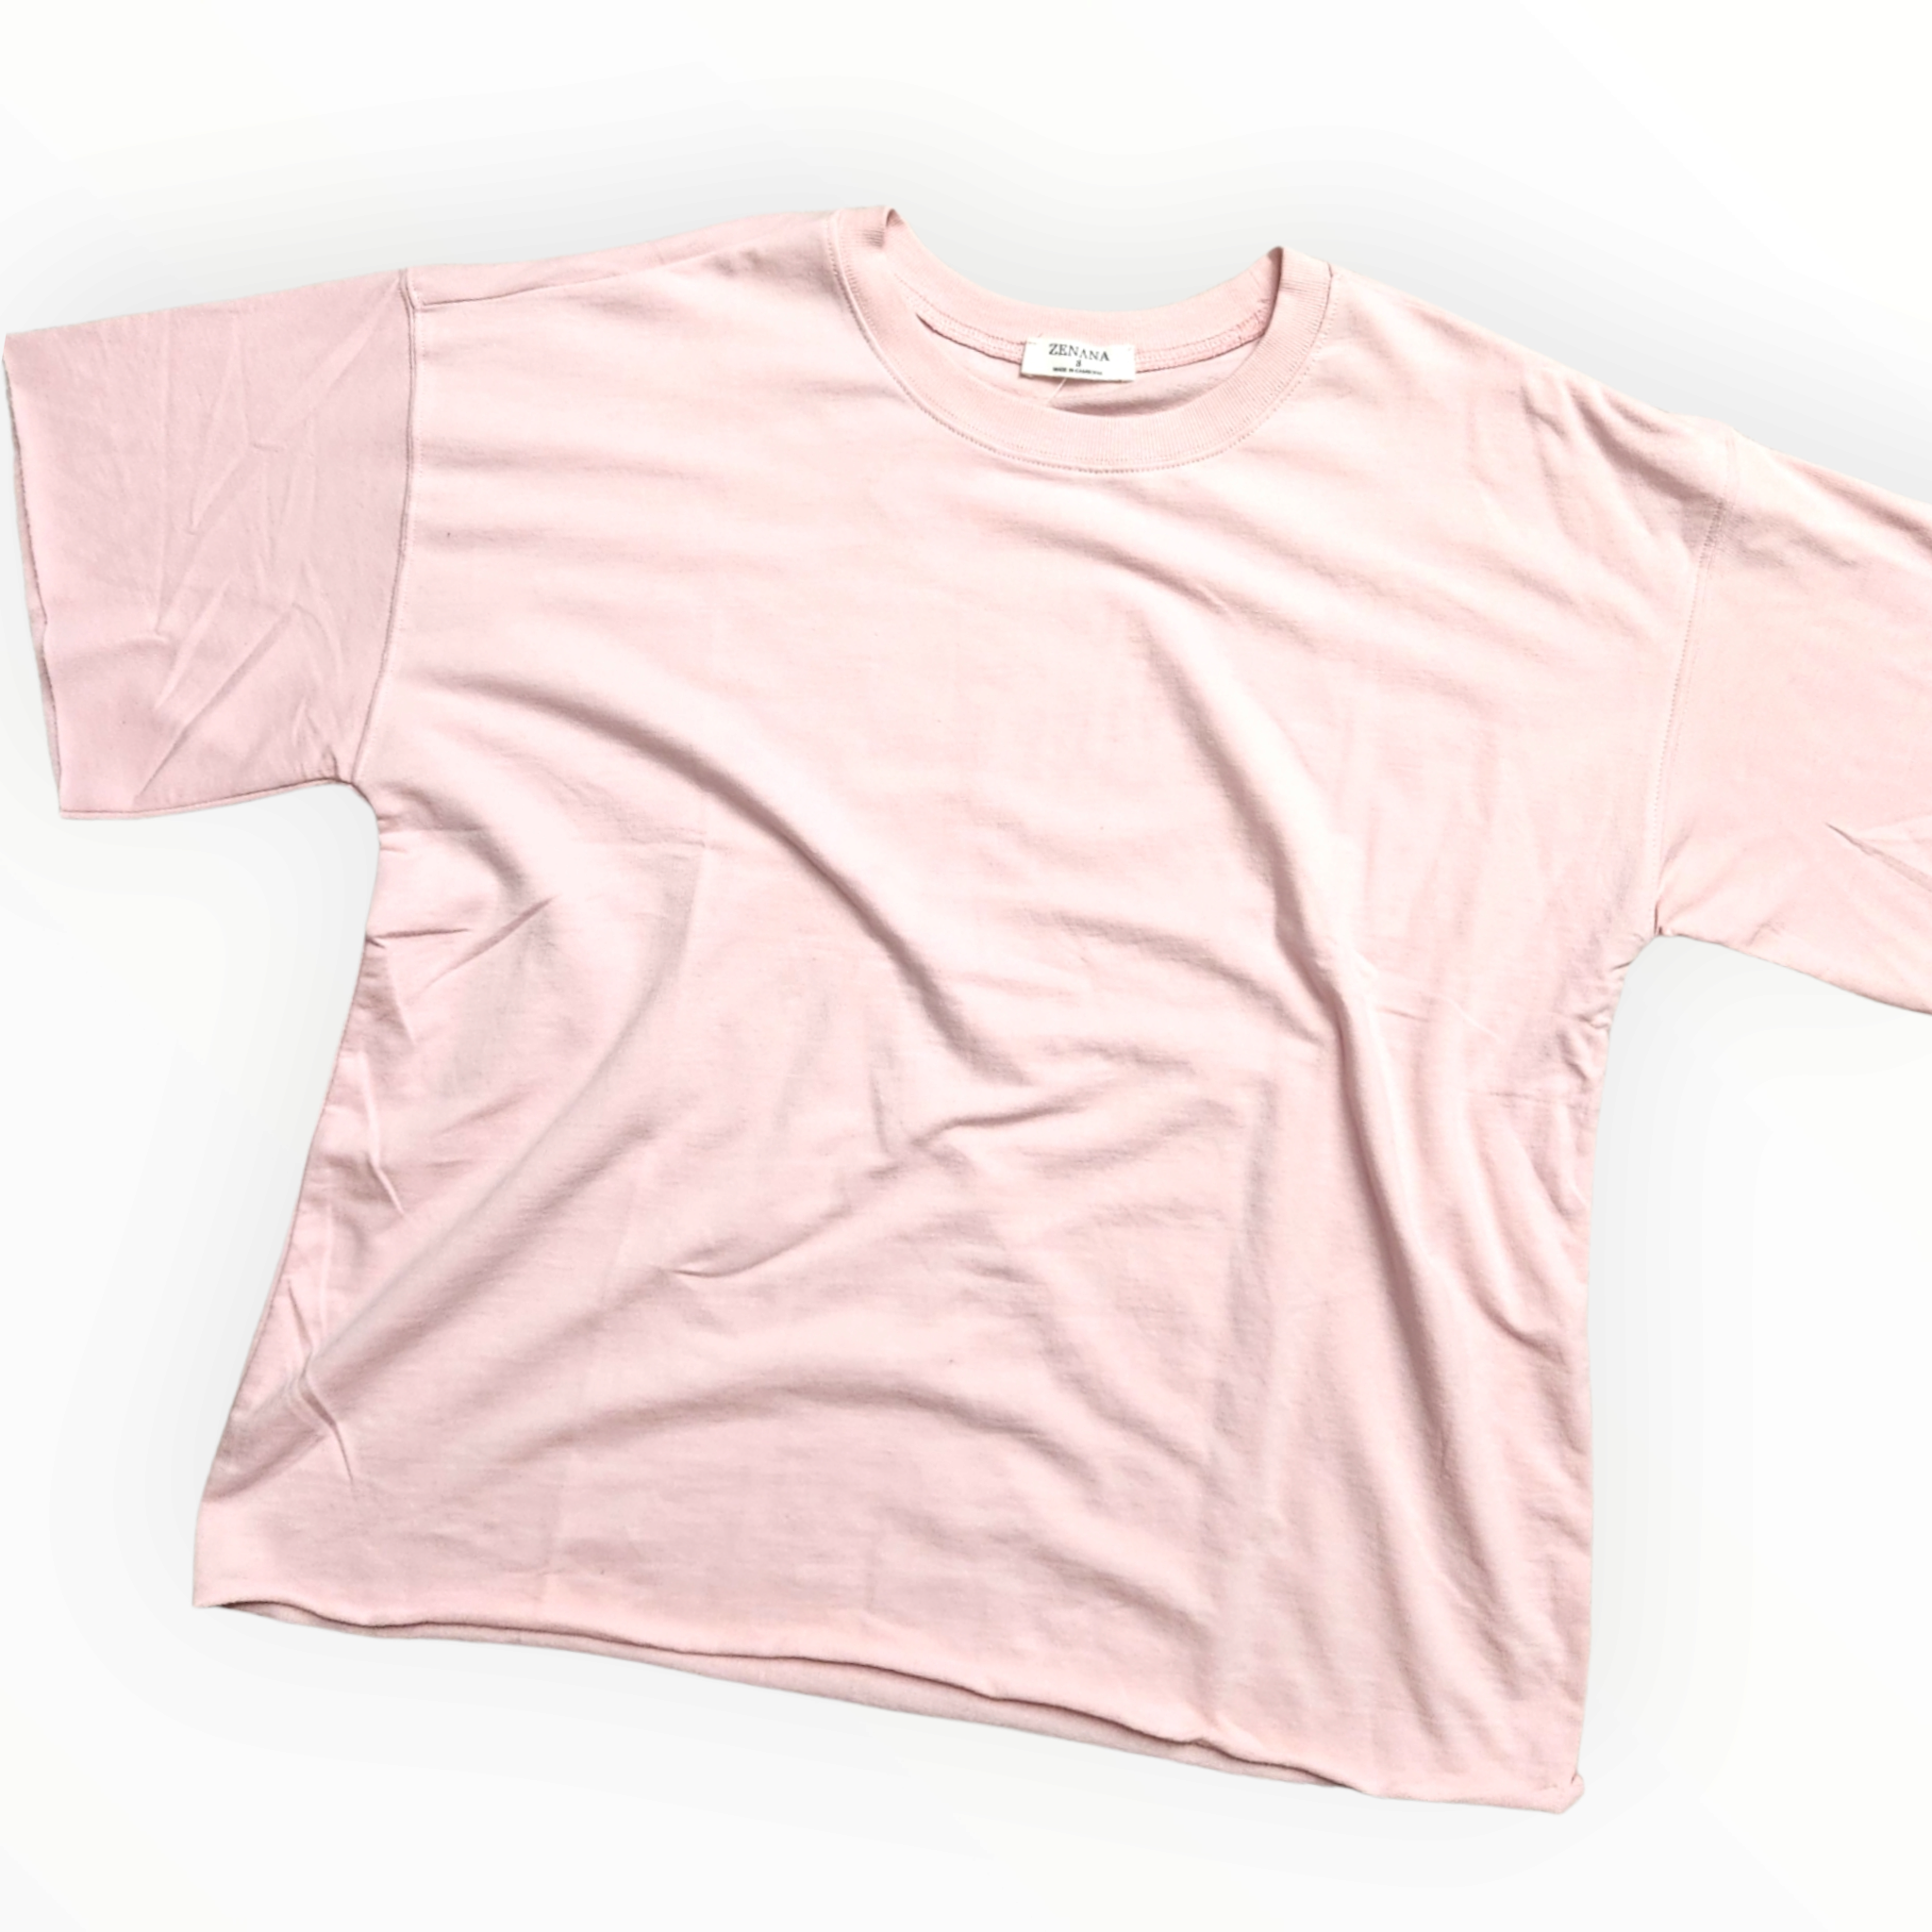 French Terry Raw Hem Top - CREAM PINK - Regular-Tee-LouisGeorge Boutique-LouisGeorge Boutique, Women’s Fashion Boutique Located in Trussville, Alabama